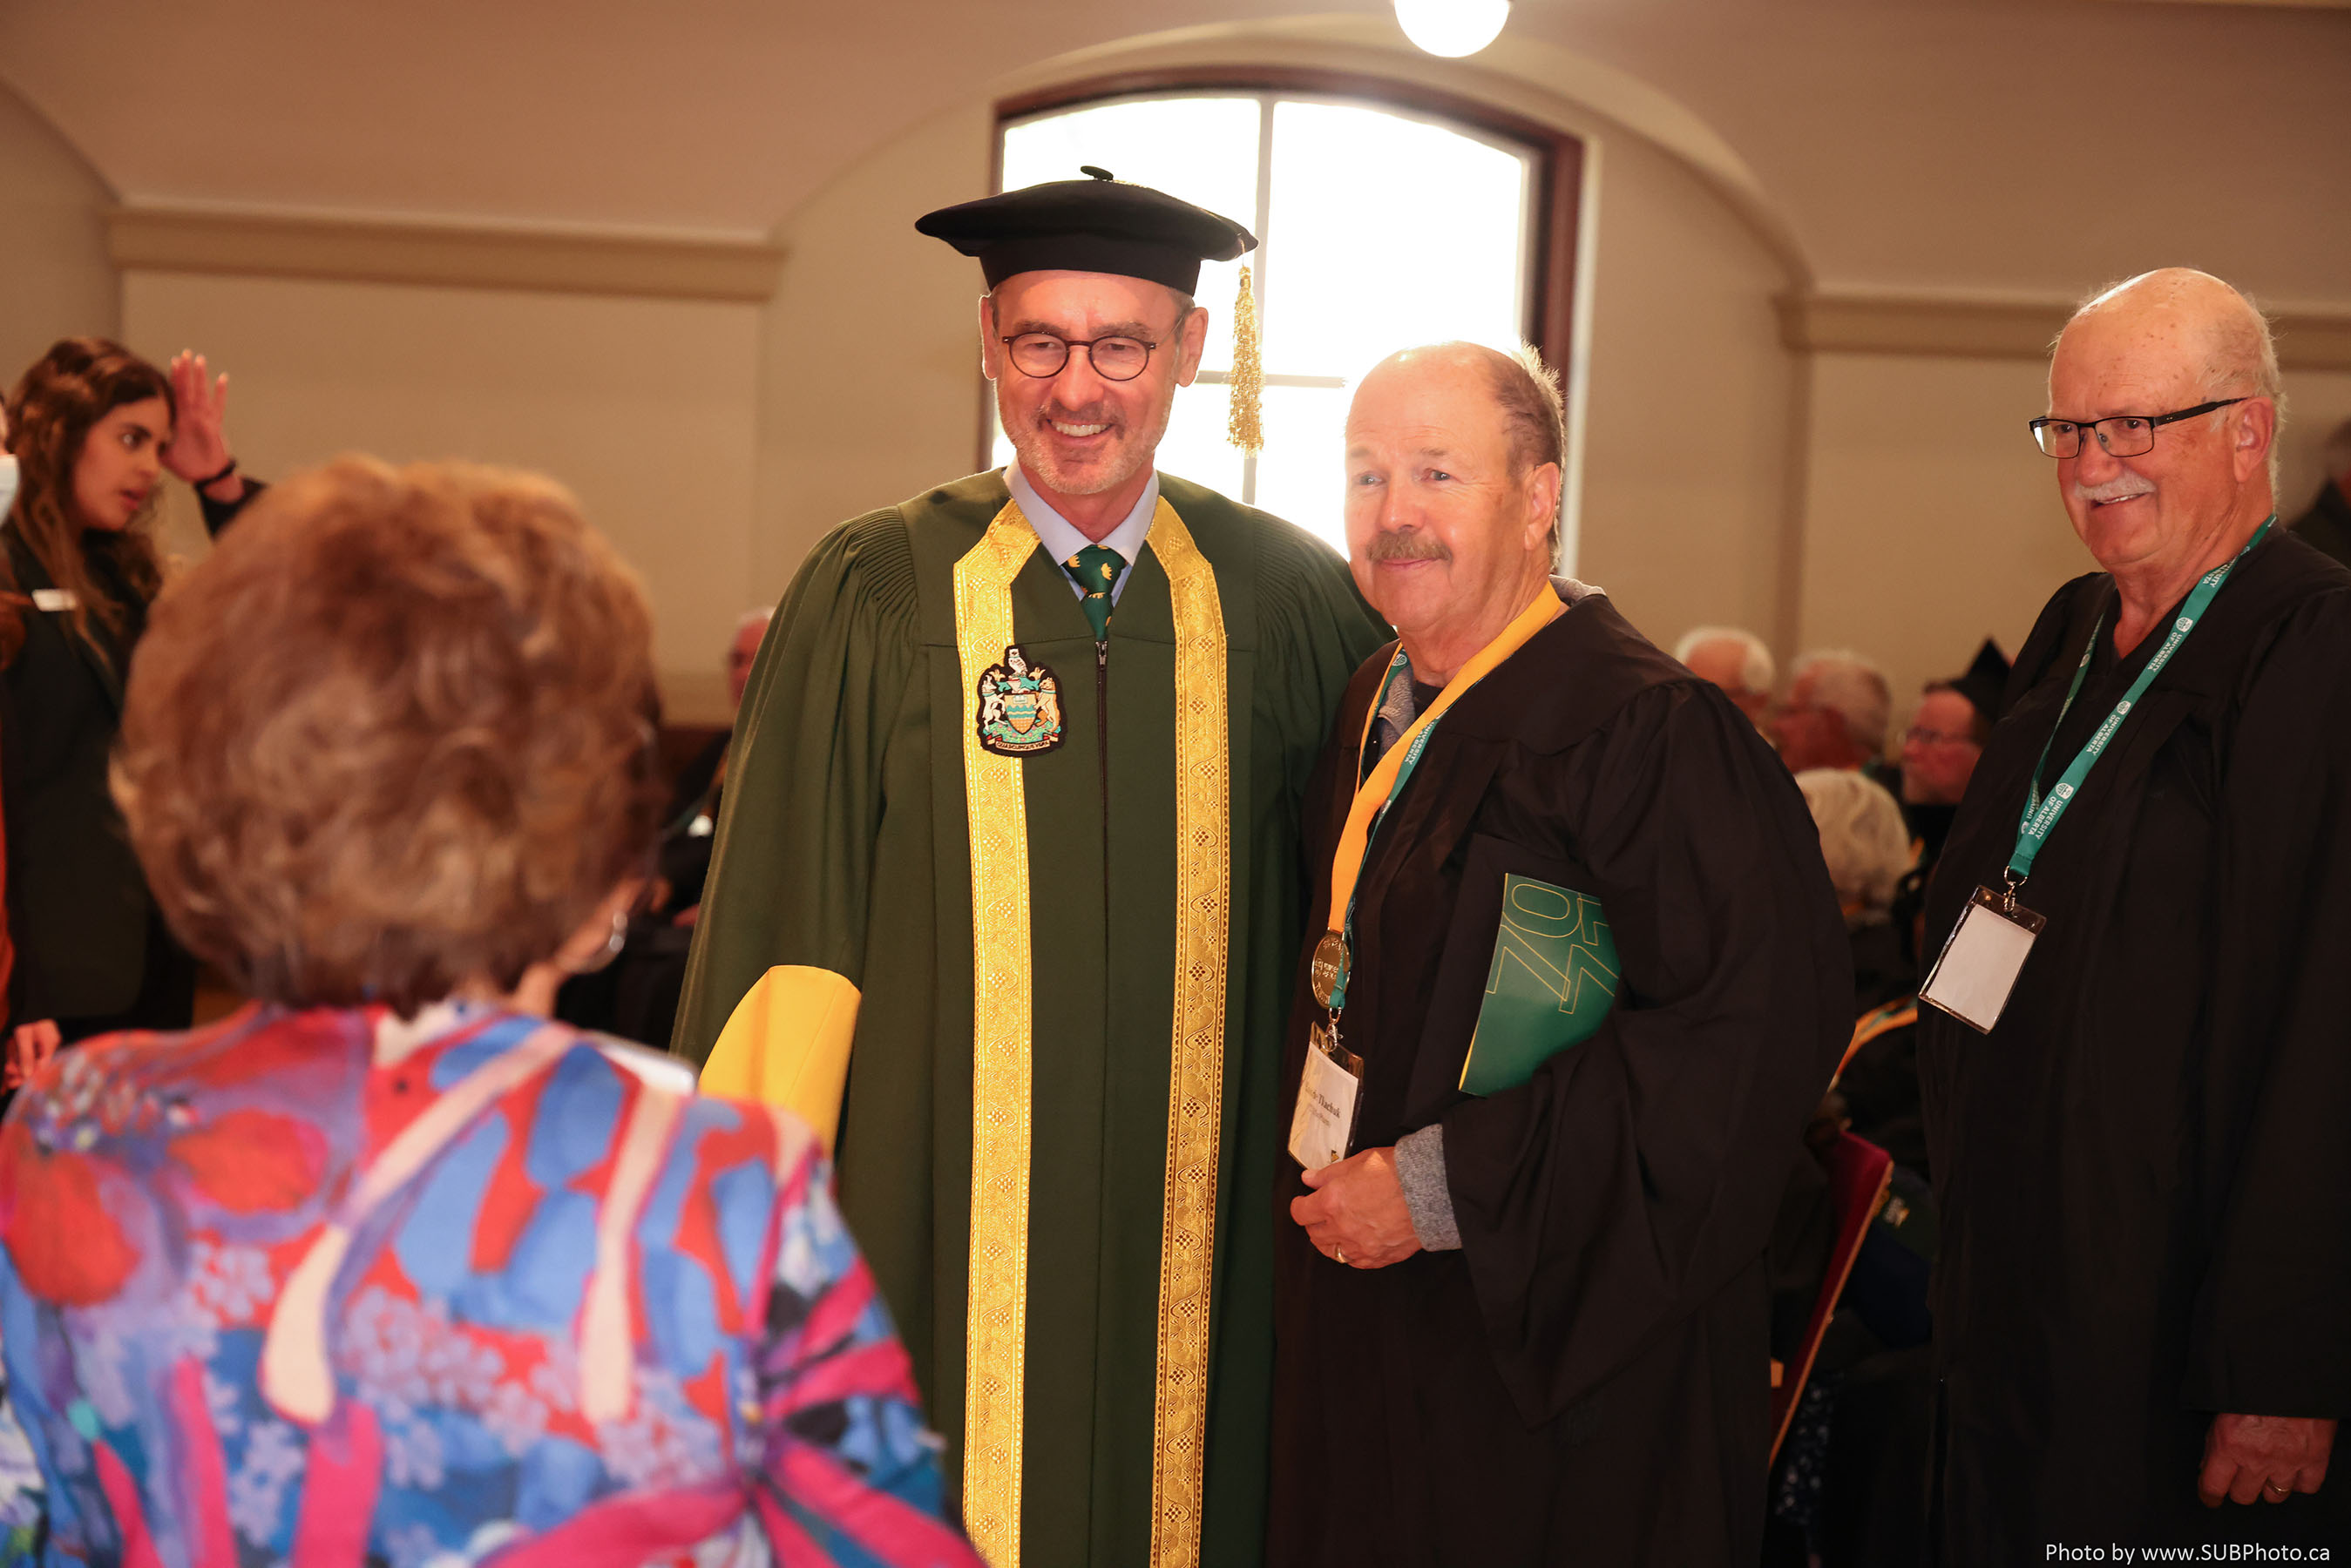 The president poses with an honouree during the Cap ‘n’ Gown ceremony